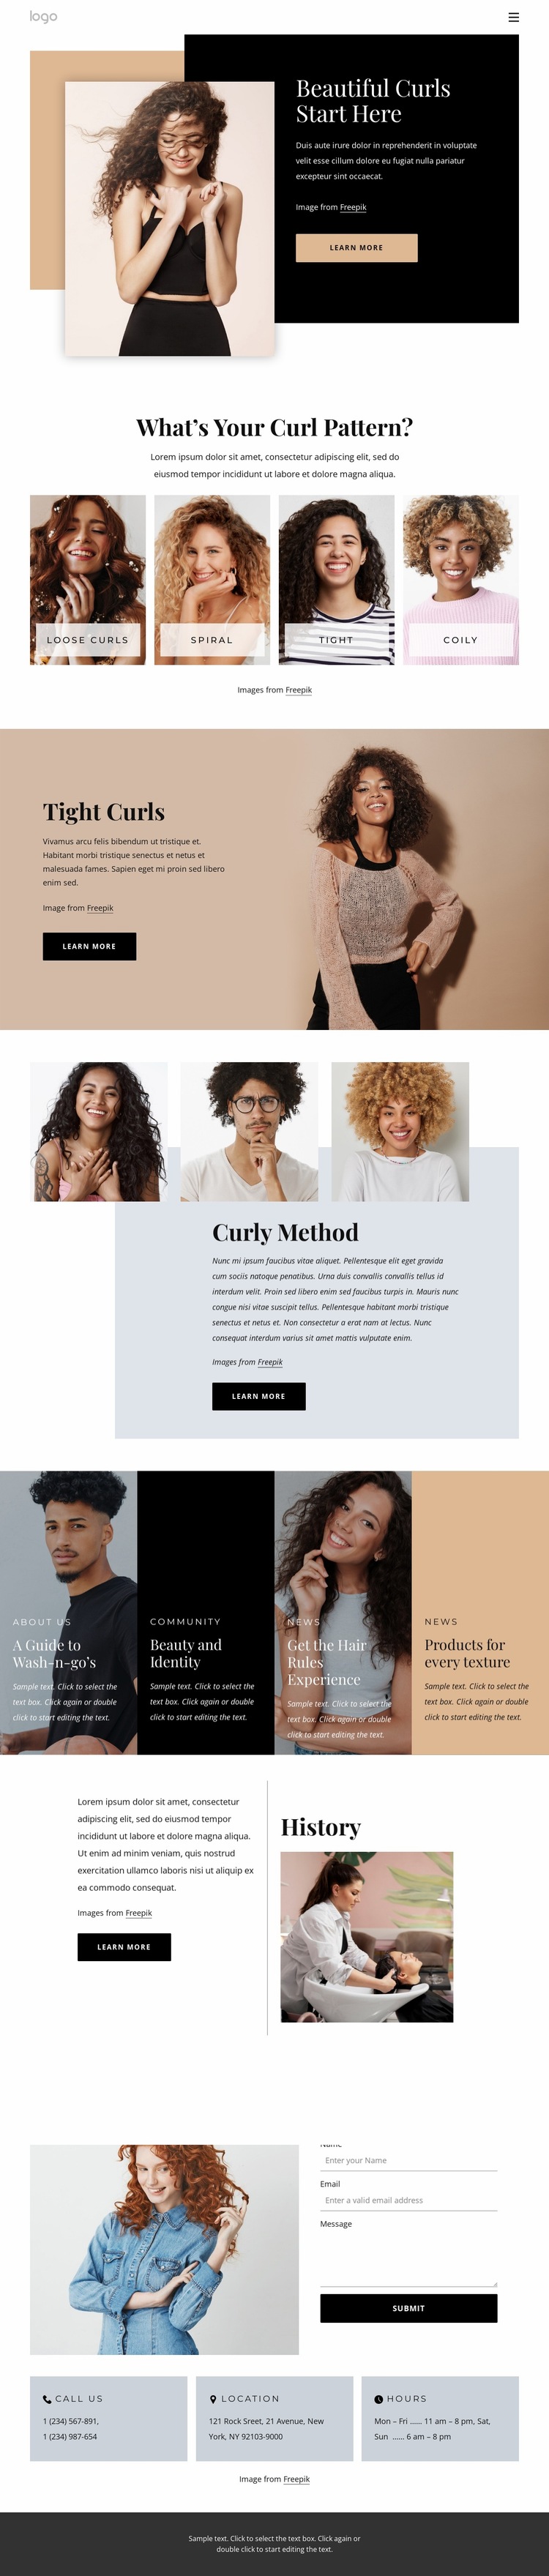 Bring out the best in your curls Website Builder Templates